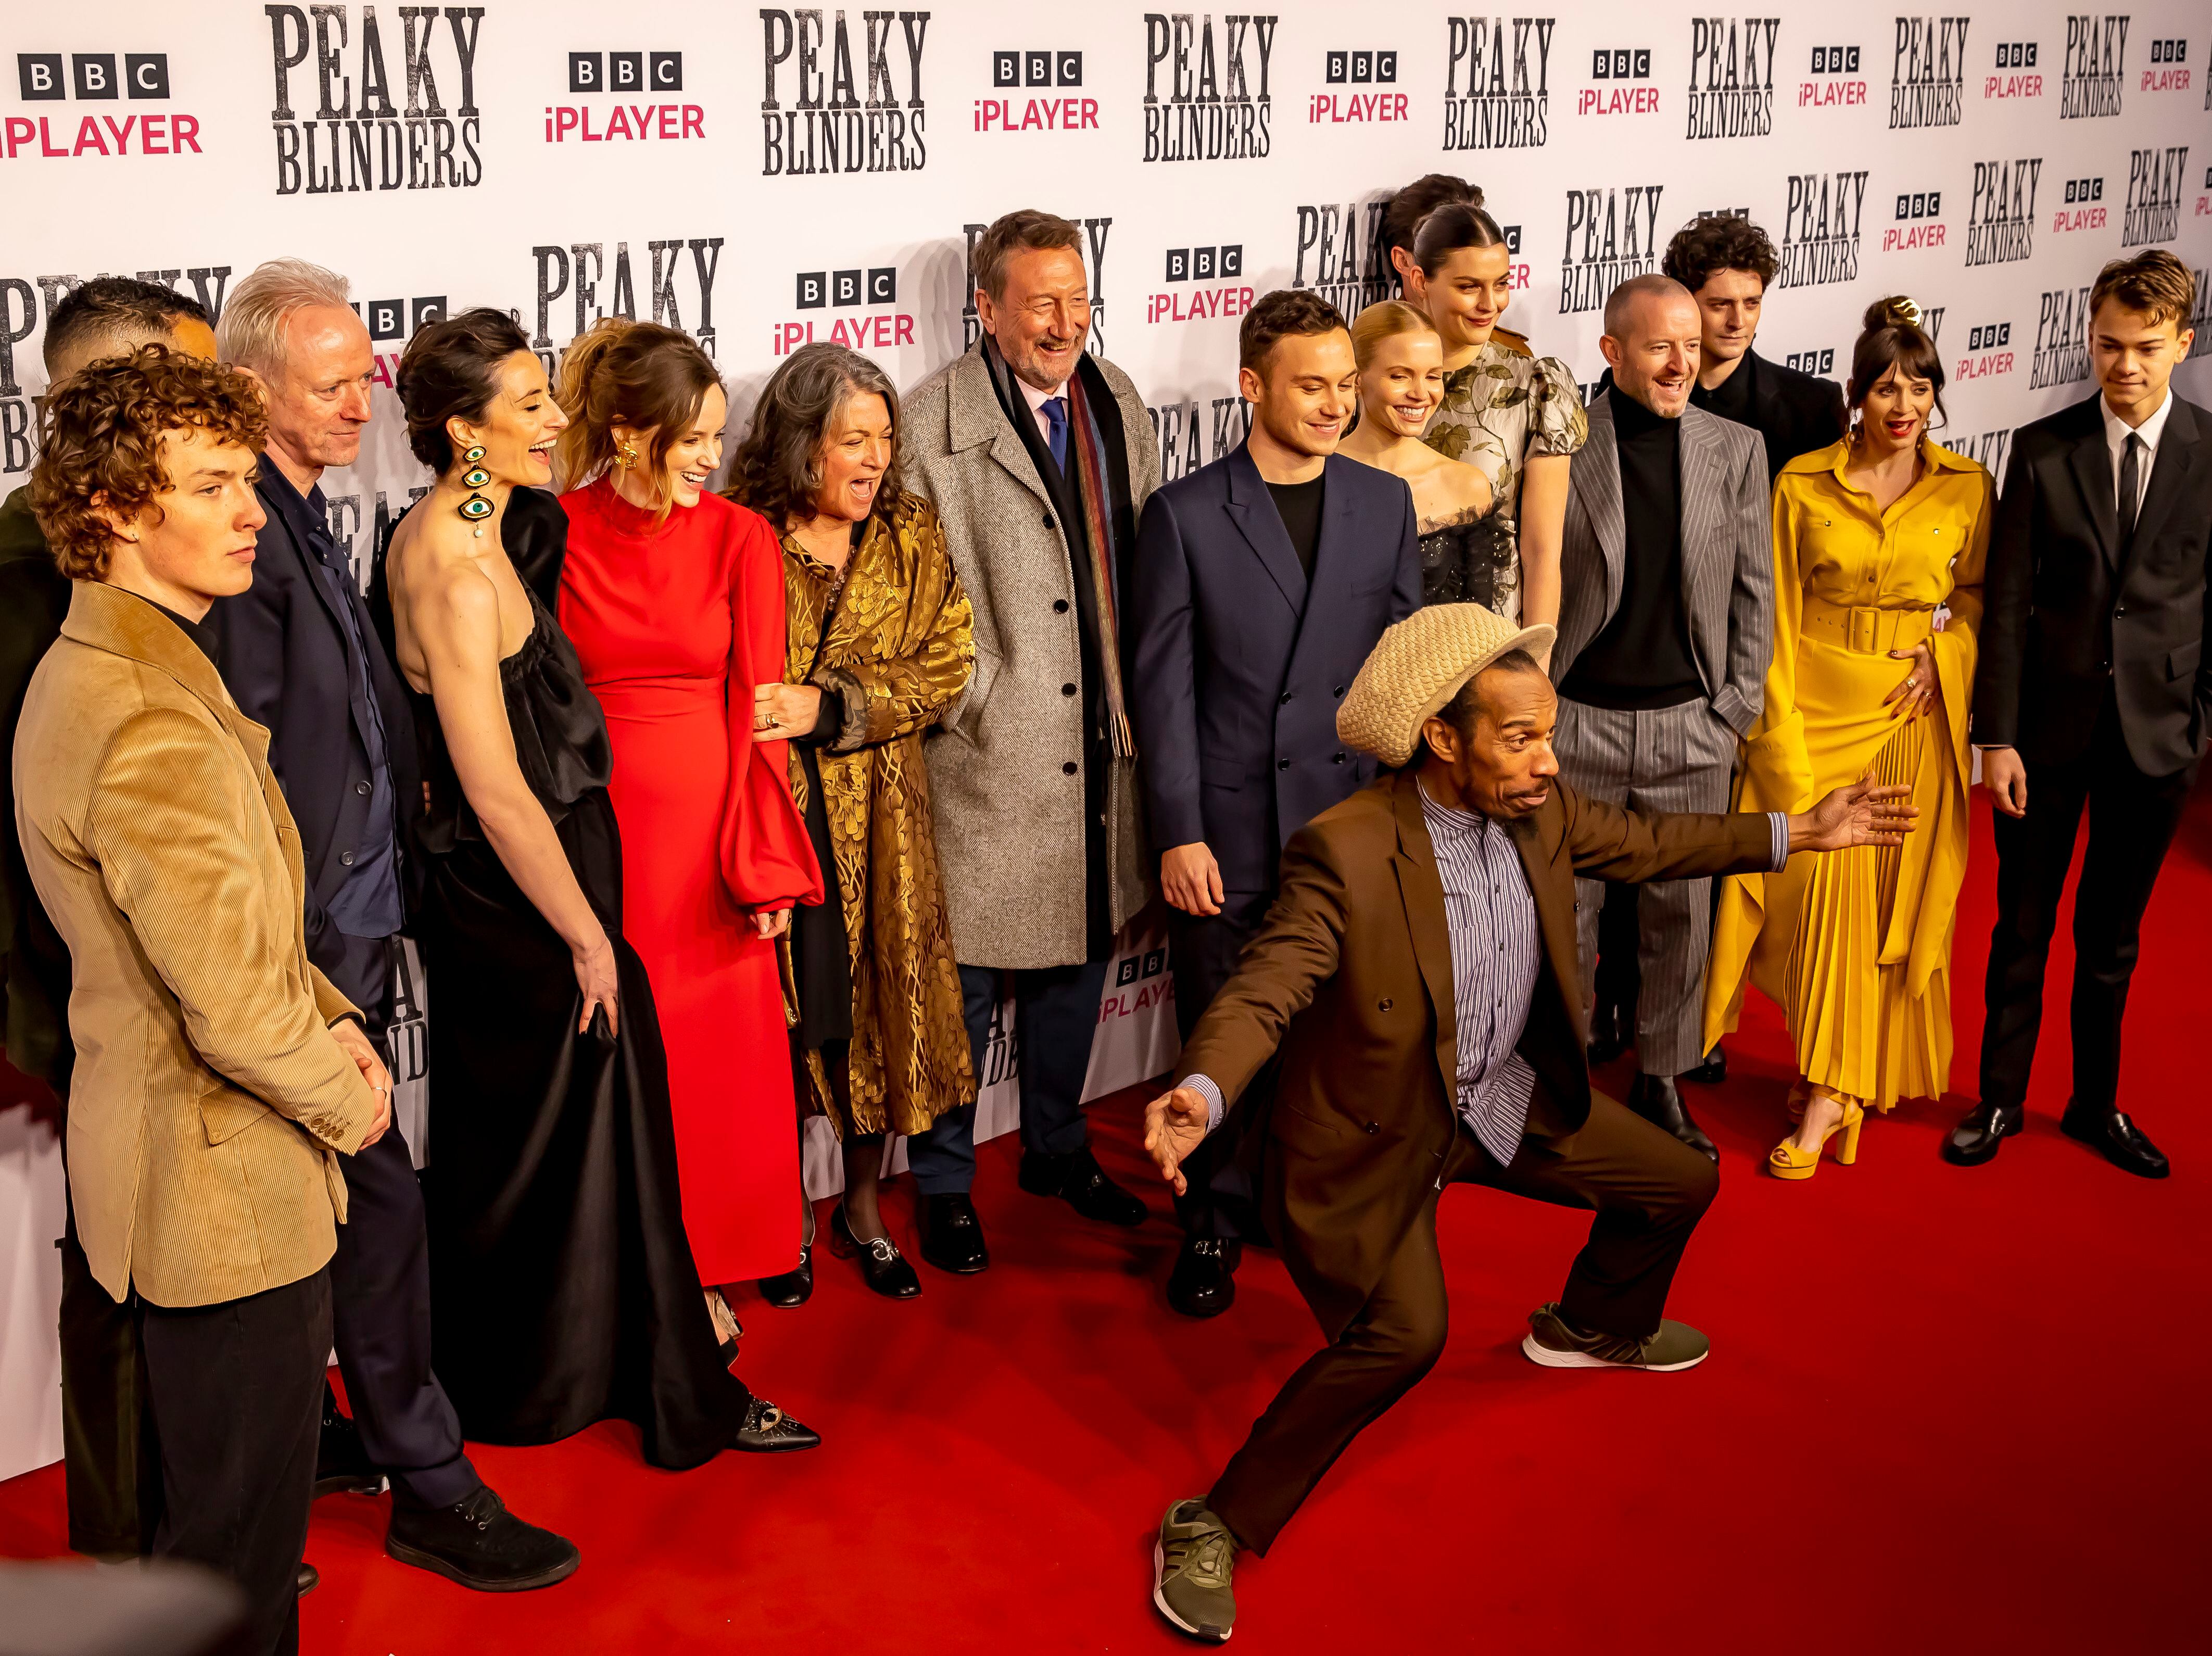 By order of the Peaky Blinders: Hundreds turn out for premiere of final series